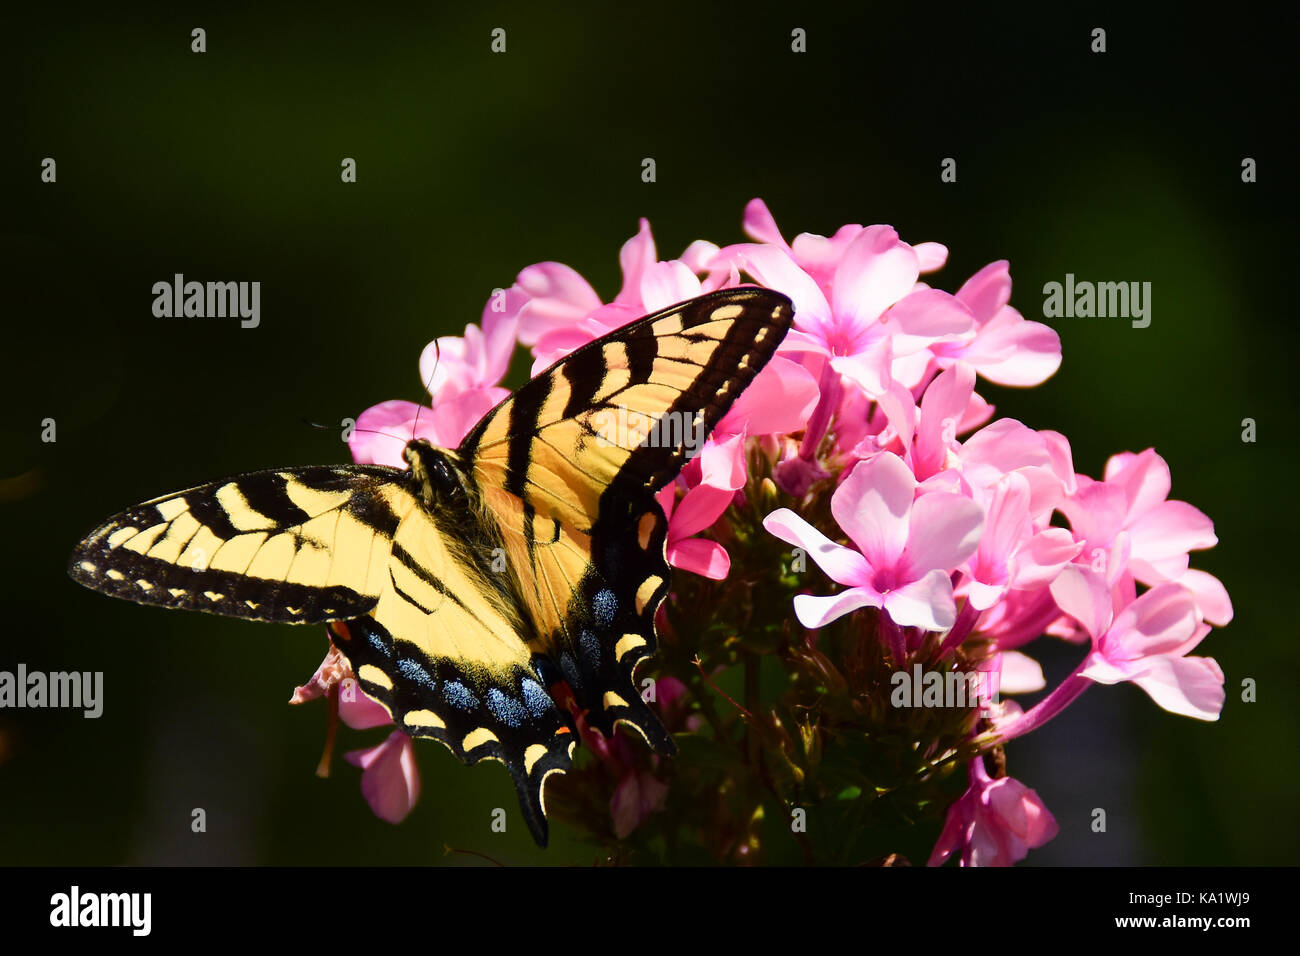 Eastern tiger swallowtail butterfly (Papilio glaucus) feeding on pink phlox in the garden with a dark shadow background. Stock Photo